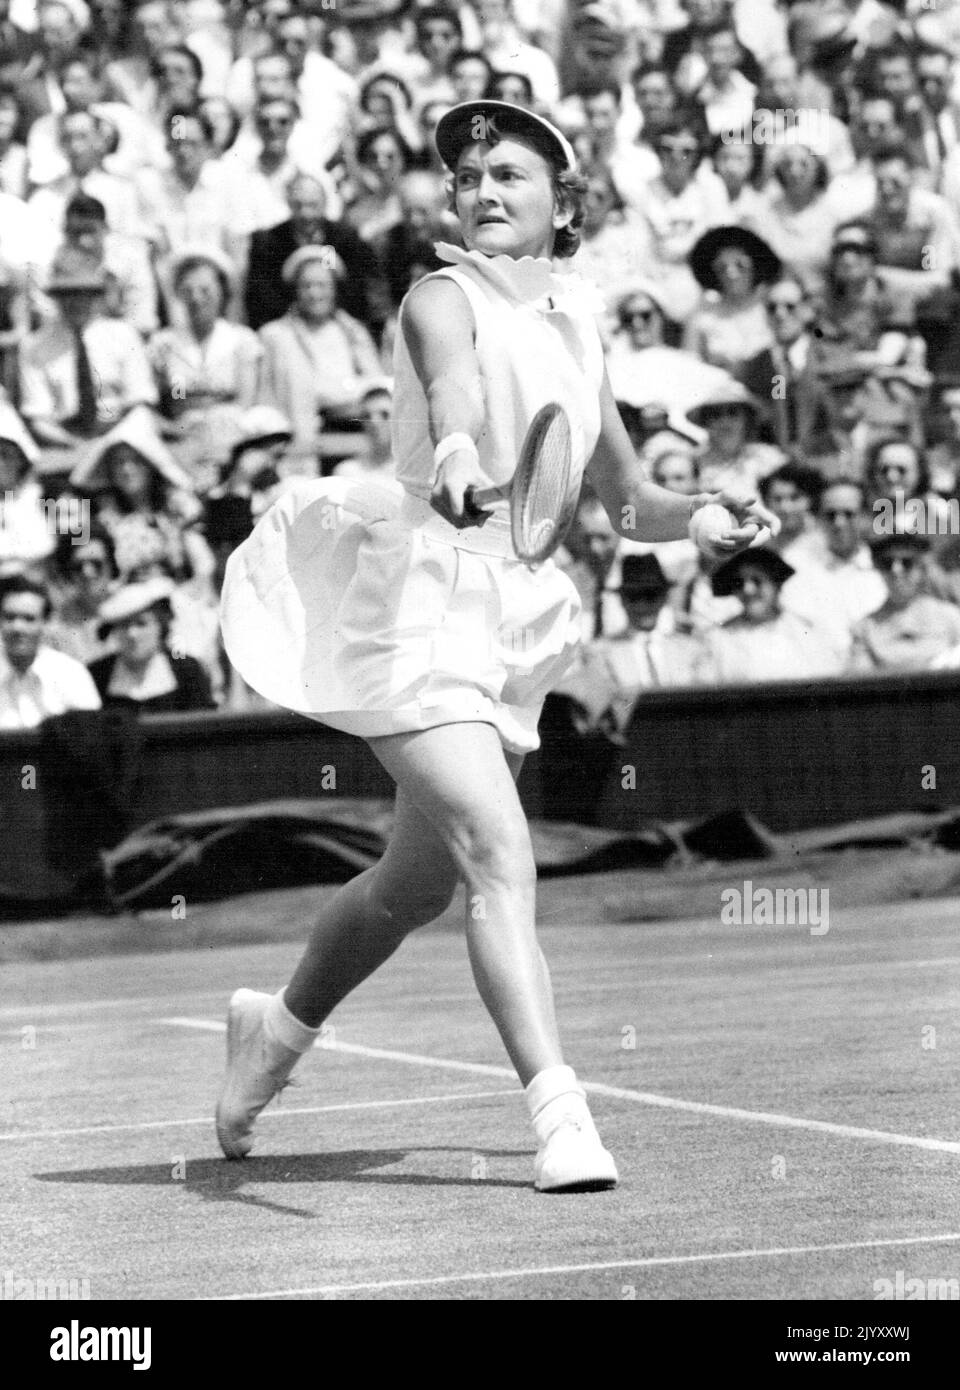 Championship Worries? - Slightly worried expression is worn by Australia's Beryl Penrose, concentrating on her Centre Court battle against wily and dangerous American Louise Brough in the women's singles of the Lawn Tennis Championships at Wimbledon, London, to-day (Friday). June 27, 1952. (Photo by Reuter Photo). Stock Photo